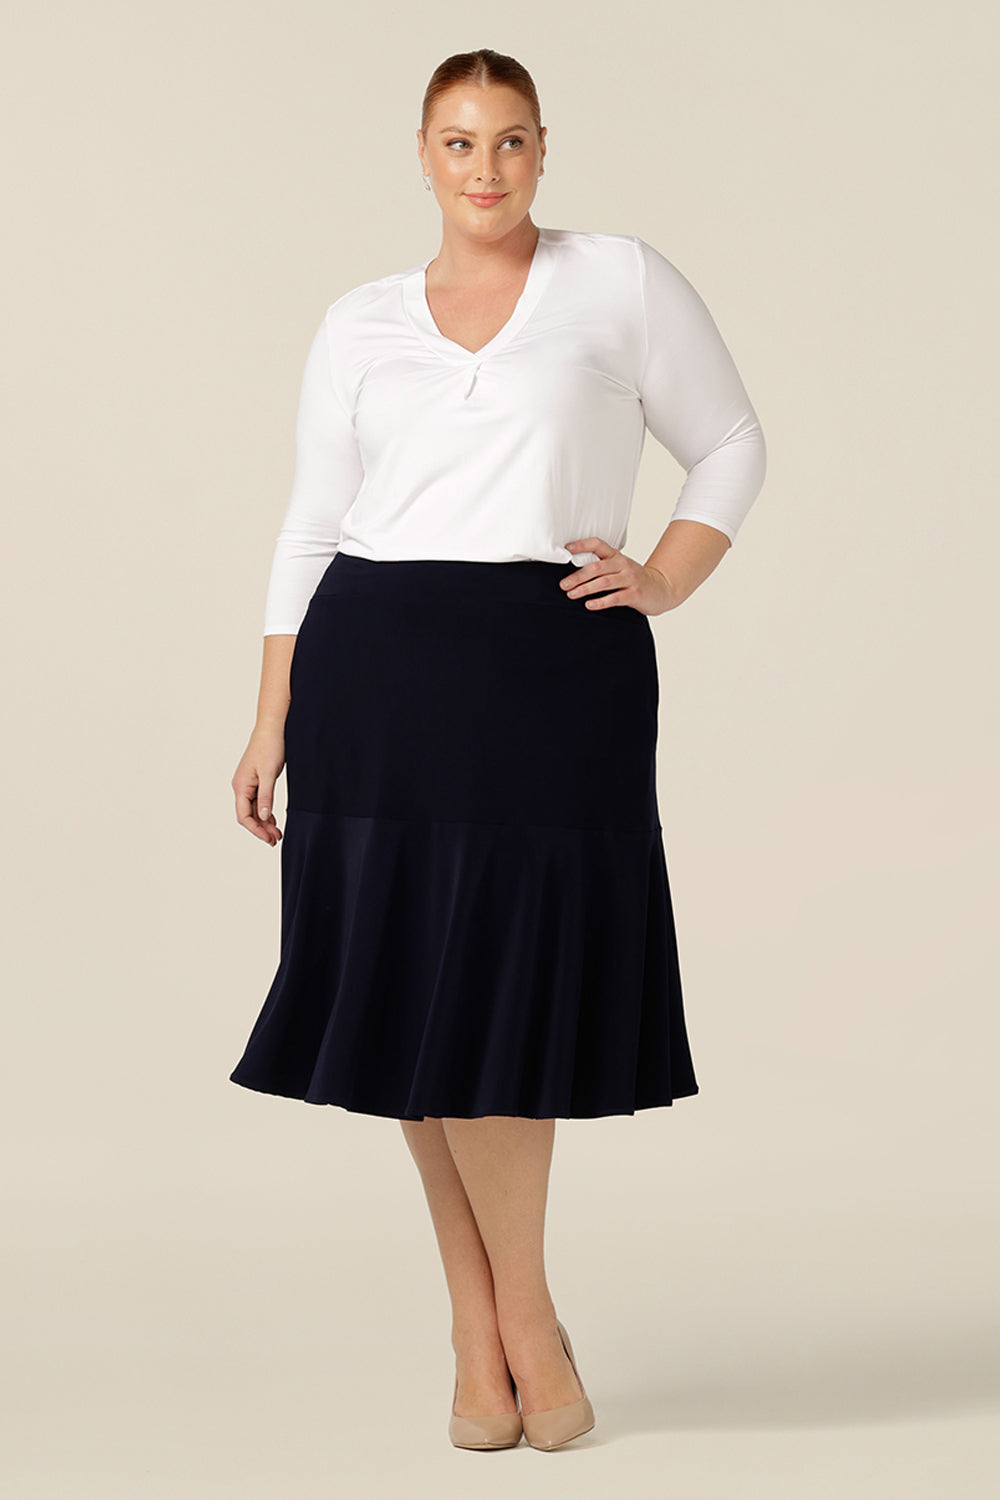 a size 18, fuller figure woman wears a knee-length, navy blue jersey skirt with ruffle hem. The skirt is worn with a white, long sleeve, bamboo jersey top for a smart-casual look that translates for easy work wear style.